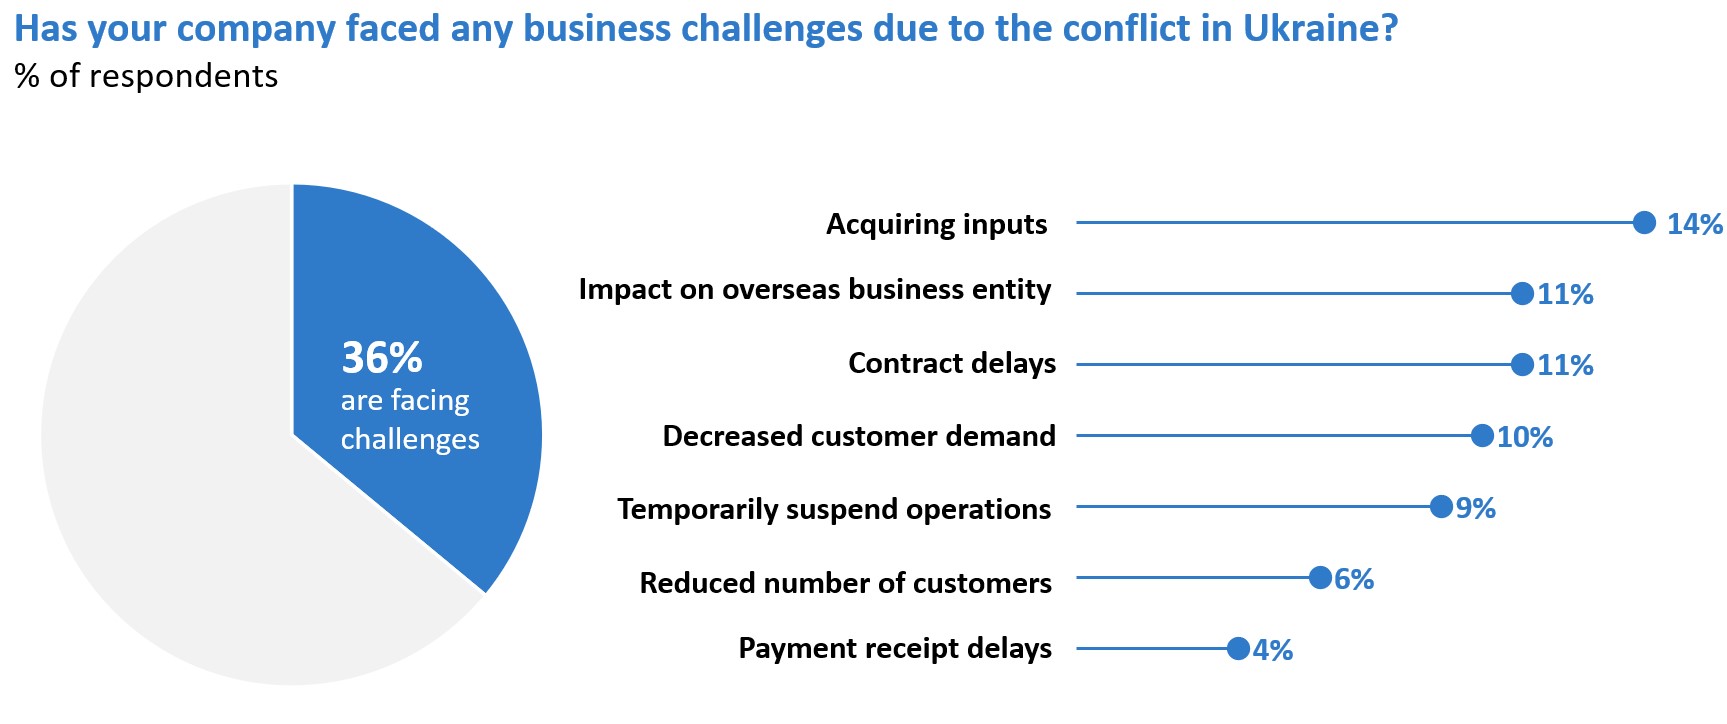 36% respondents are facing business challenges due to the war in Ukraine.